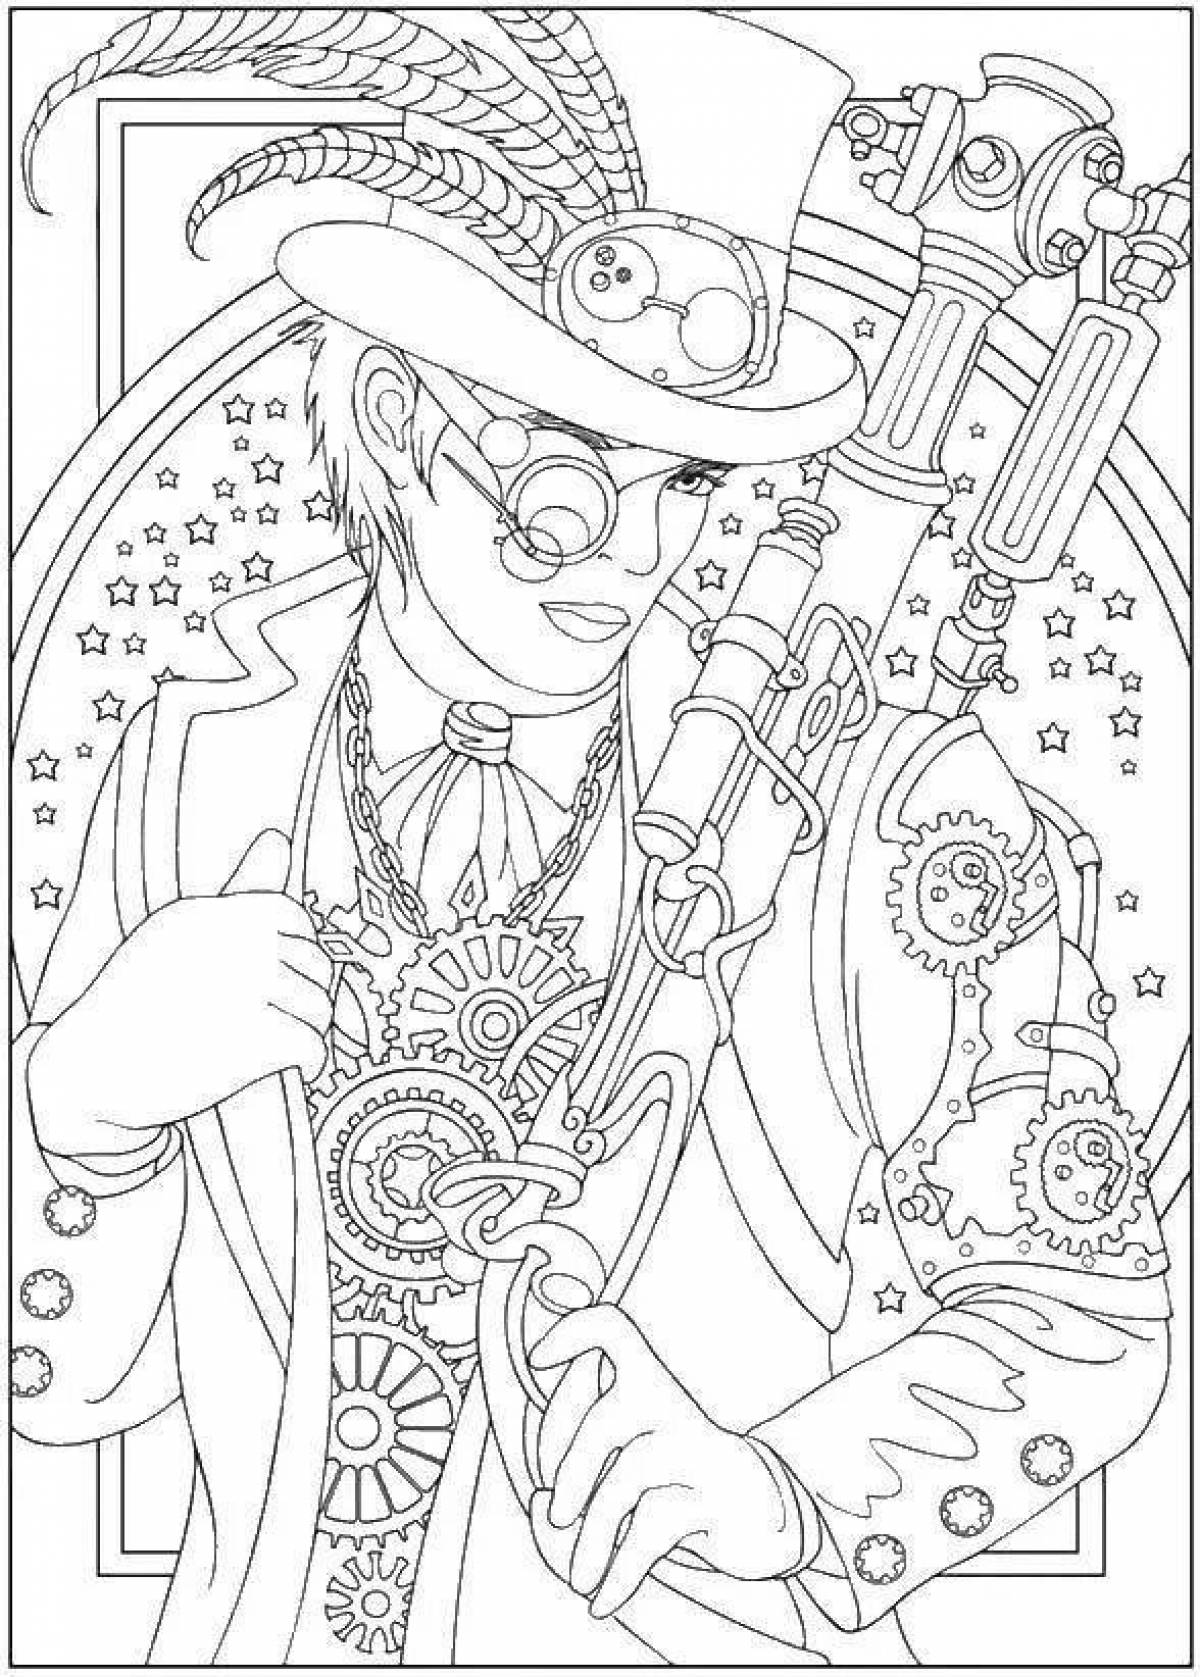 Decorated coloring book for adult boys